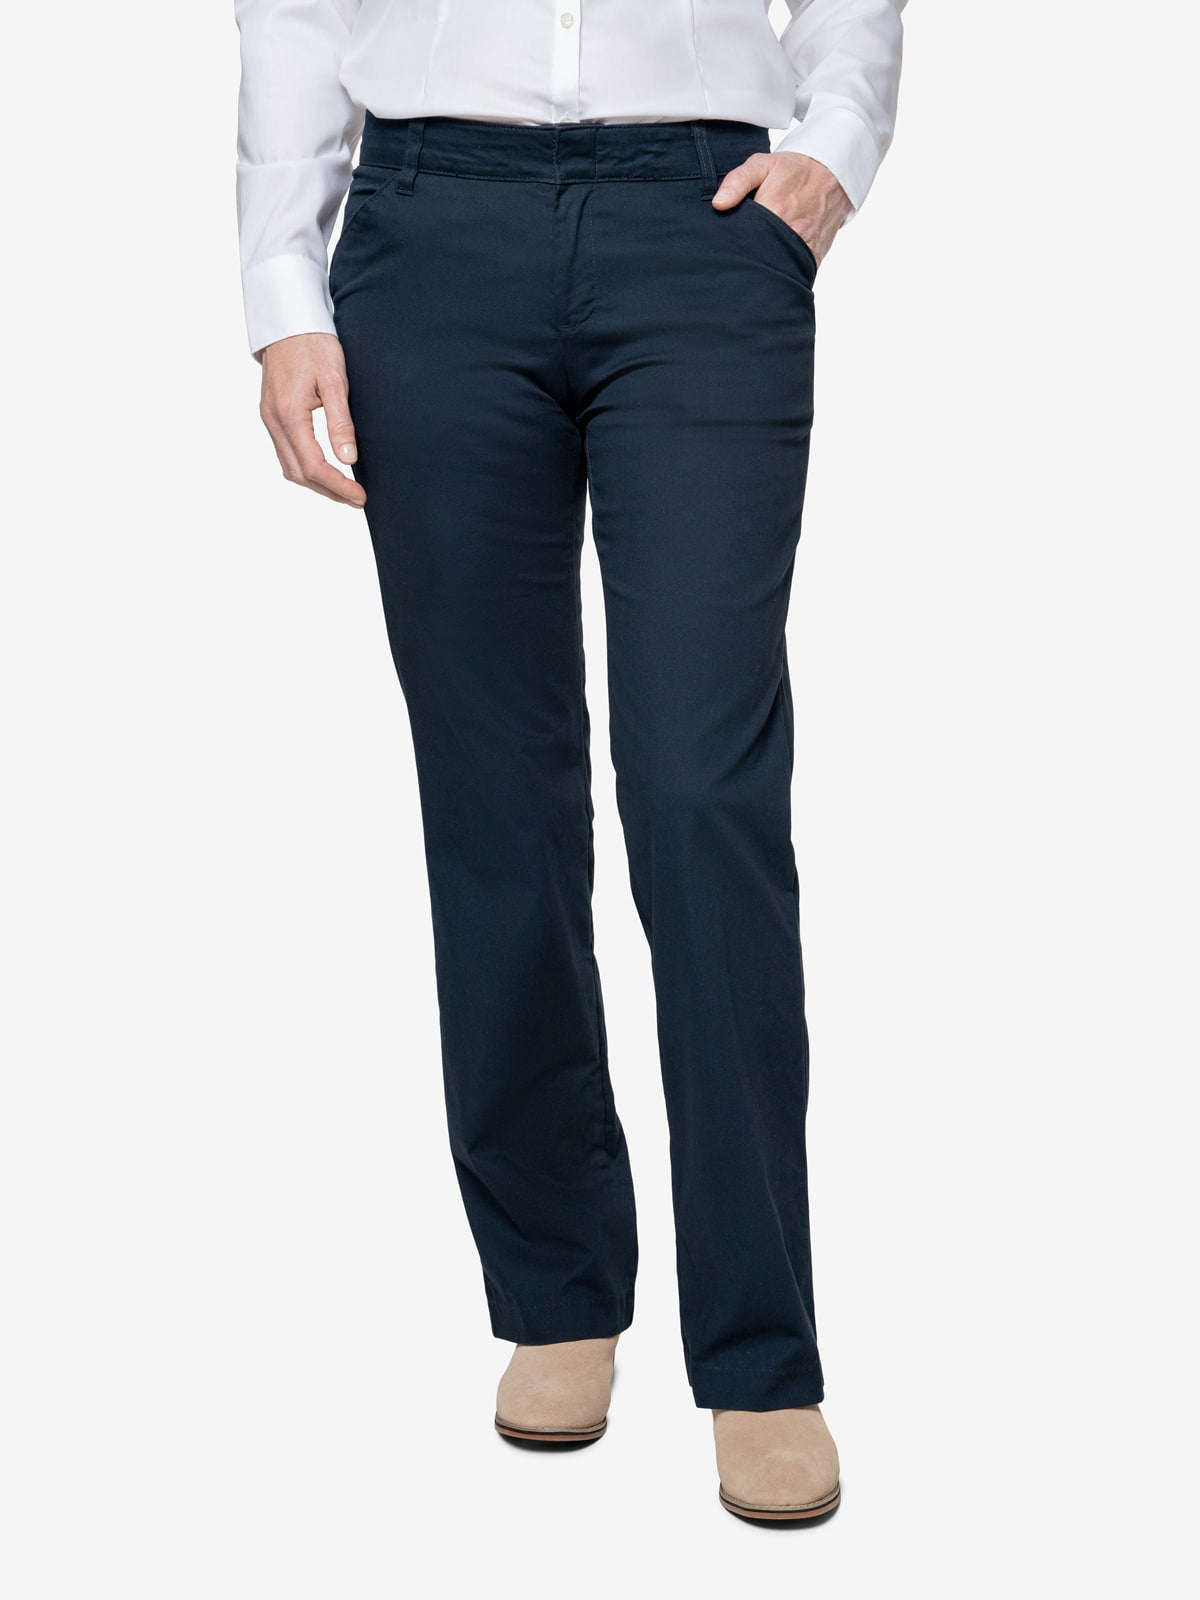 Women's Relaxed Stretch Twill Pant